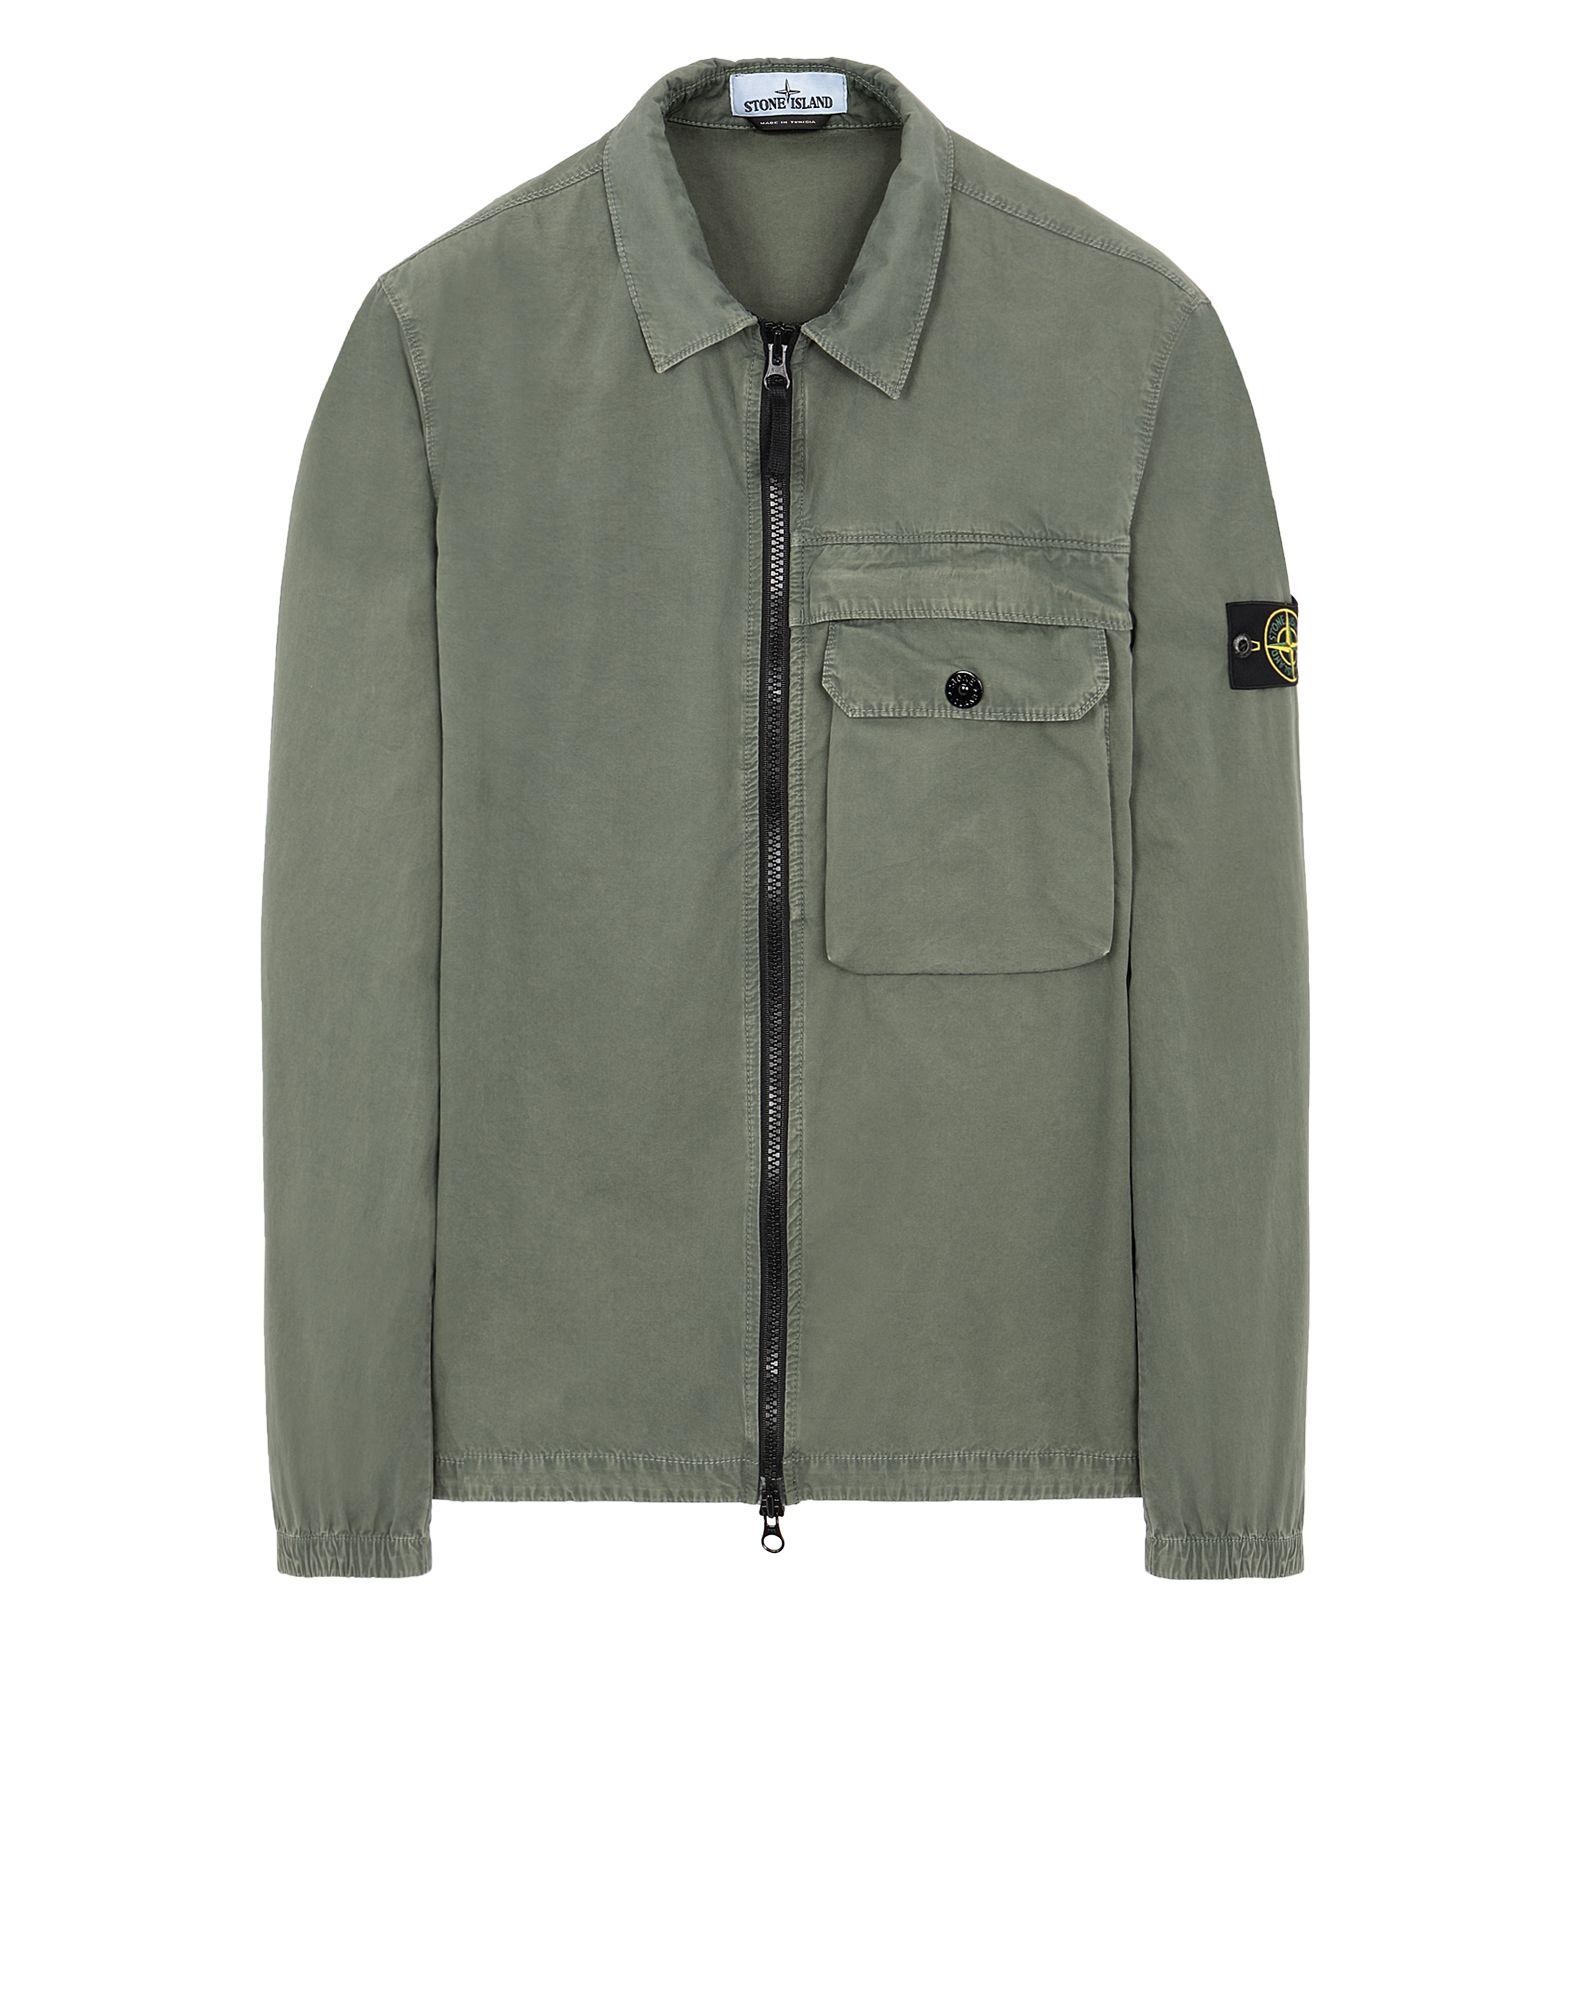 Stone Island 107wn T.co+old in Sage Green (Green) for Men - Lyst